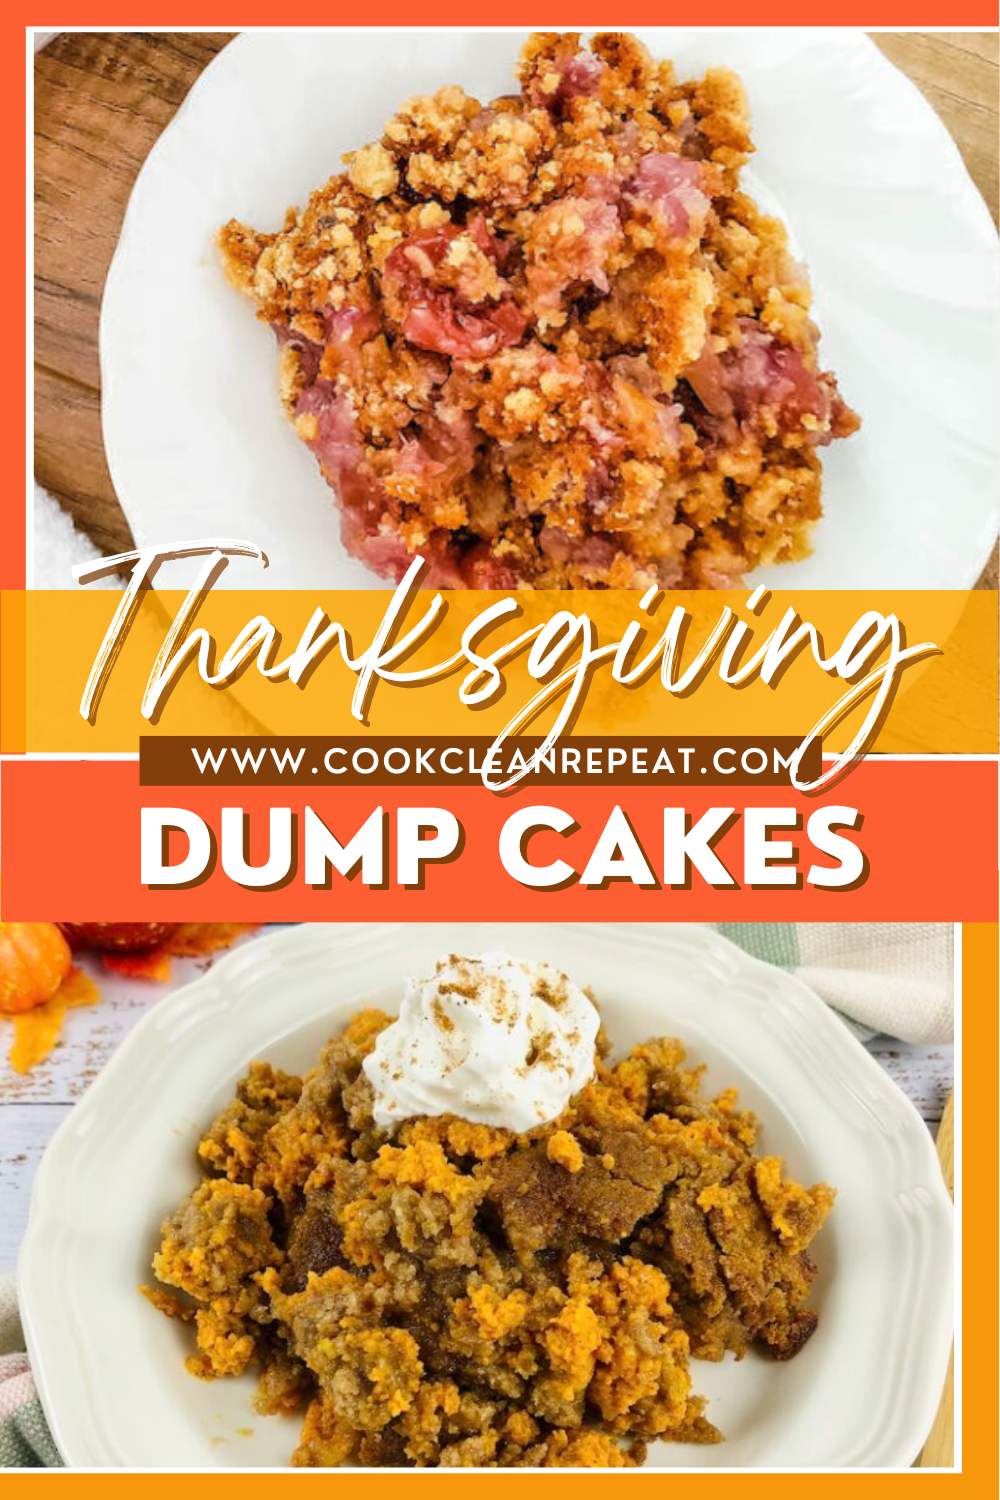 Pin showing the title Thanksgiving Dump Cakes